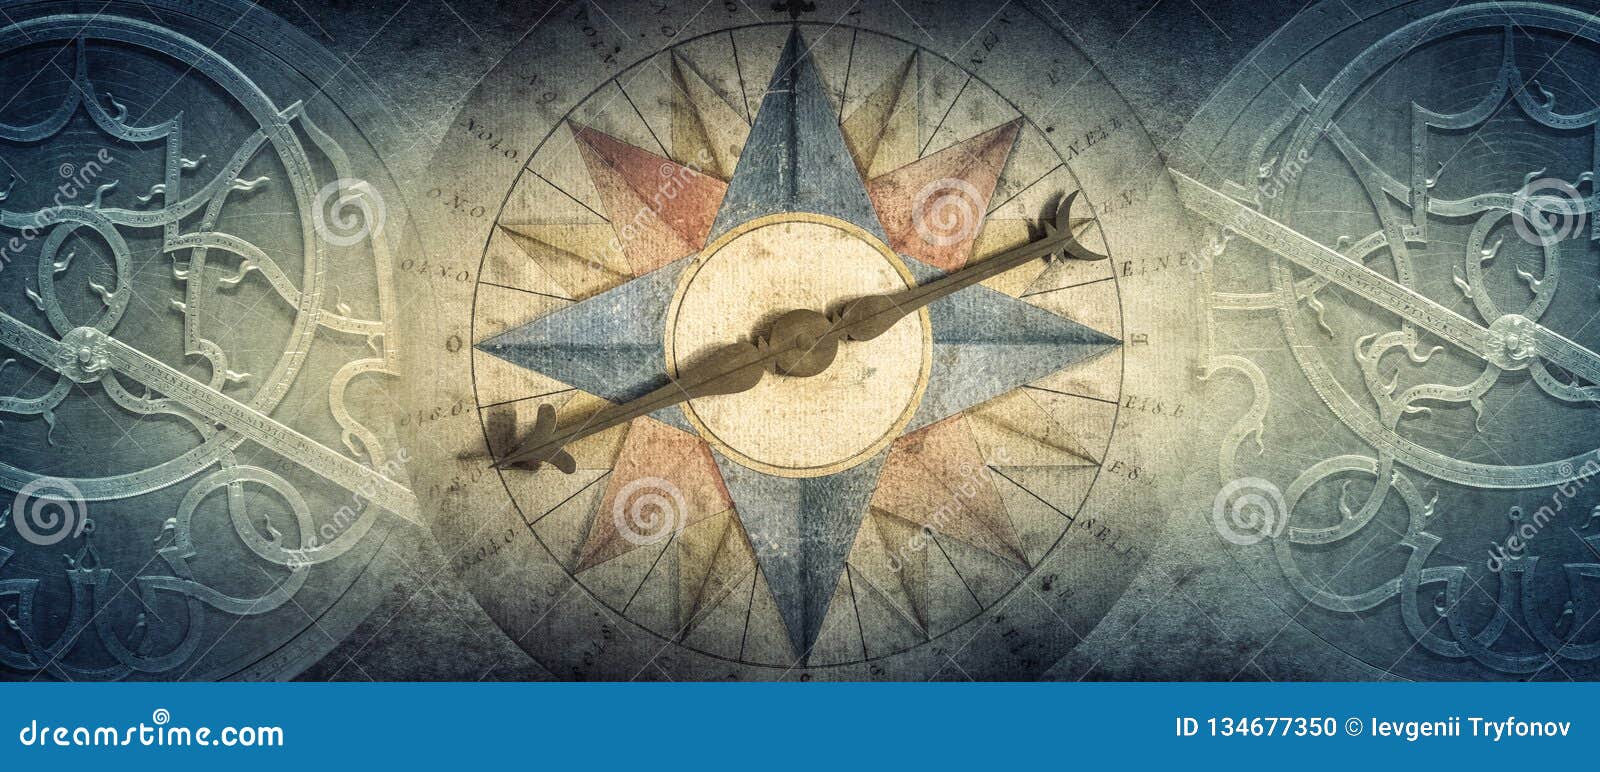 old compass and astrolabe - ancient astronomical device on vintage background. abstract old conceptual background on history,